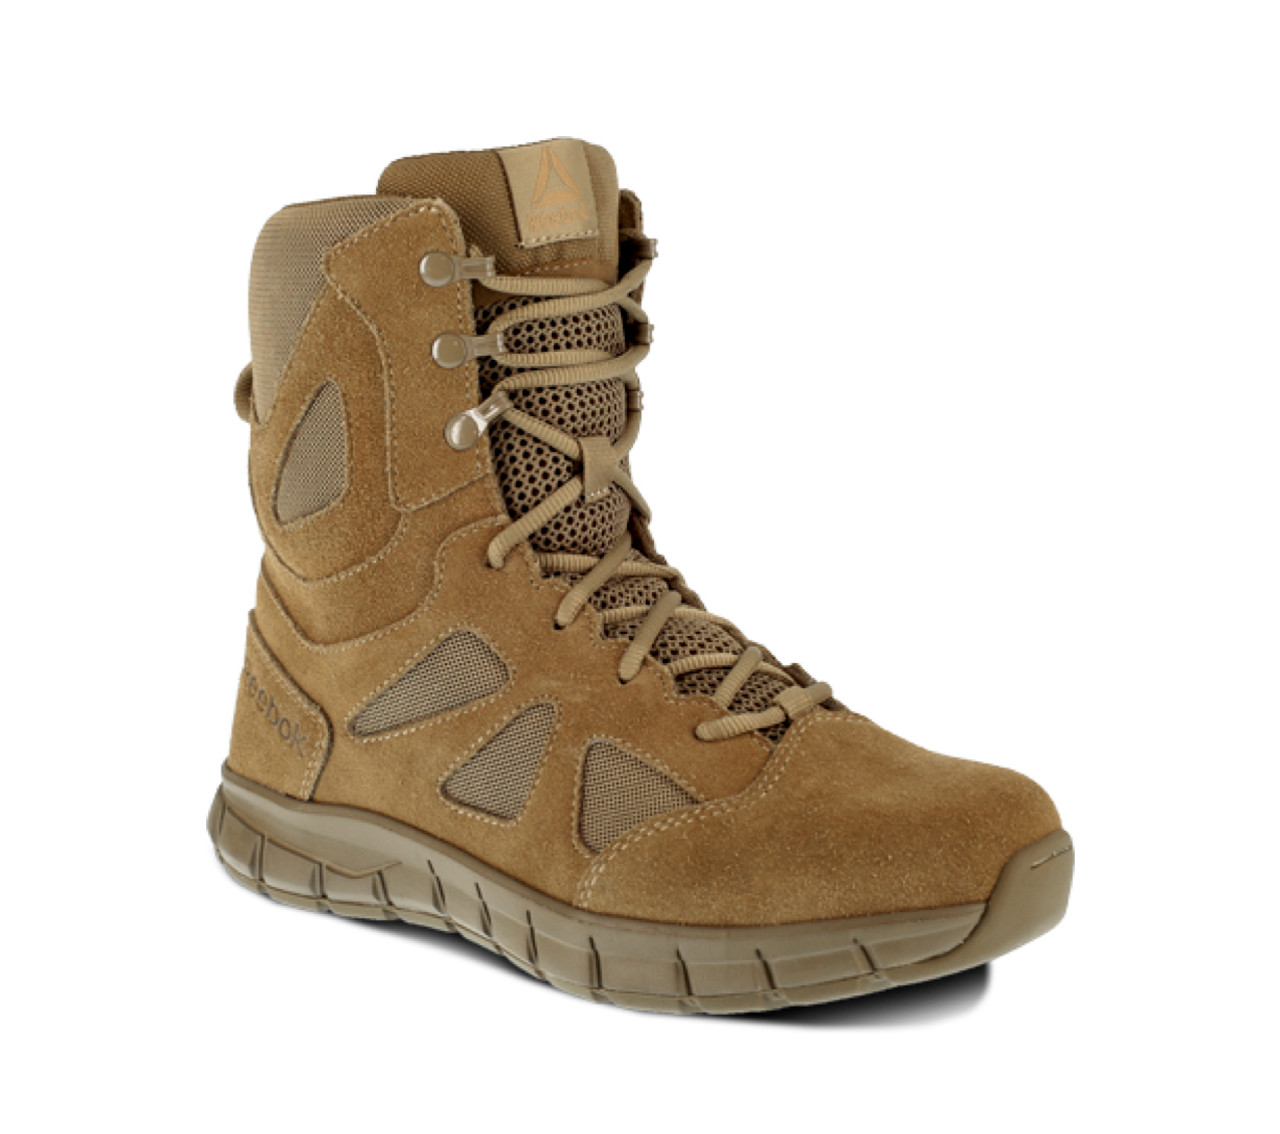 Reebok RB8405 Men's Sublite Cushion Mid Tactical Boot